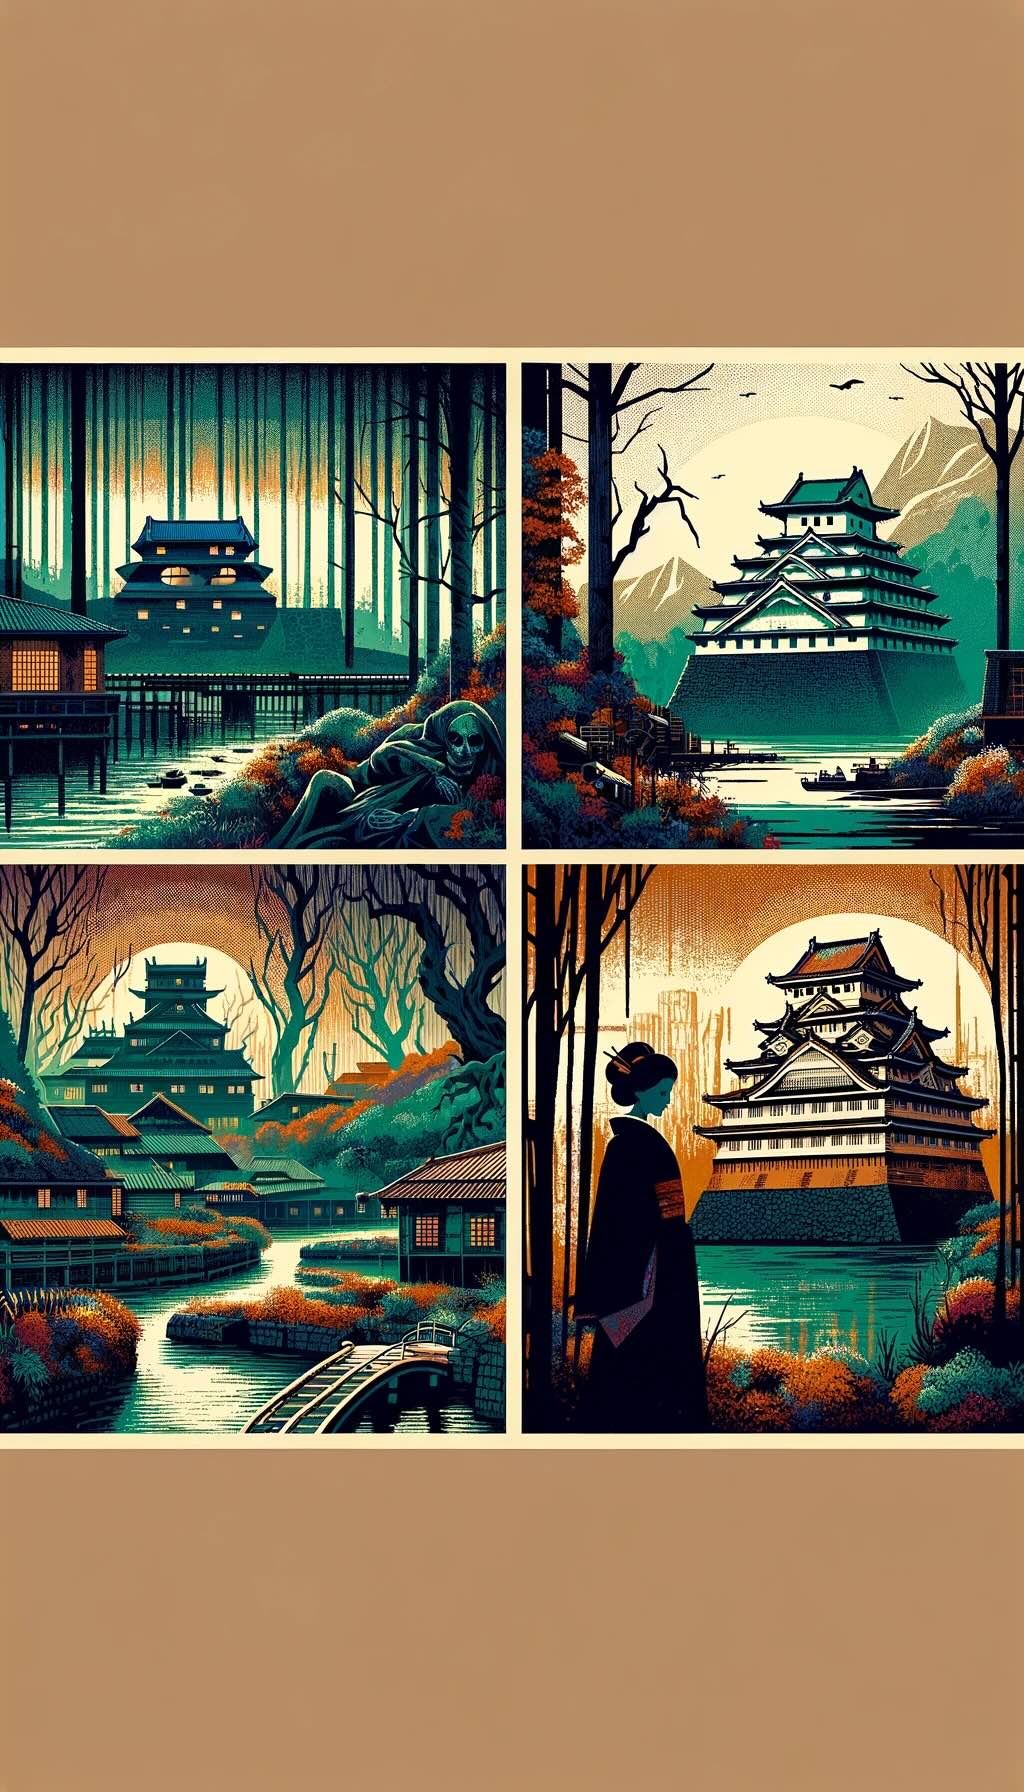 Japan's most haunted historical sites, each rendered with an eerie and captivating essence. Aokigahara Forest: This part of the image depicts the dense, otherworldly foliage of Aokigahara, the Sea of Trees, capturing its somber mythology and eerie atmosphere. Himeji Castle: Illustrated here is the stunning architecture of Himeji Castle, intertwined with the ghostly legend of Okiku, adding a spectral quality to its historical beauty. Hashima Island: The abandoned industrial ruins of Hashima Island, or Gunkanjima, are portrayed with a haunting aura, reflecting its past as a bustling coal mining facility now left in desolation. Himuro Mansion: This segment represents the mysterious Himuro Mansion, shrouded in urban legends of hauntings and brutal rituals, offering a modern twist to Japan's haunted locales.